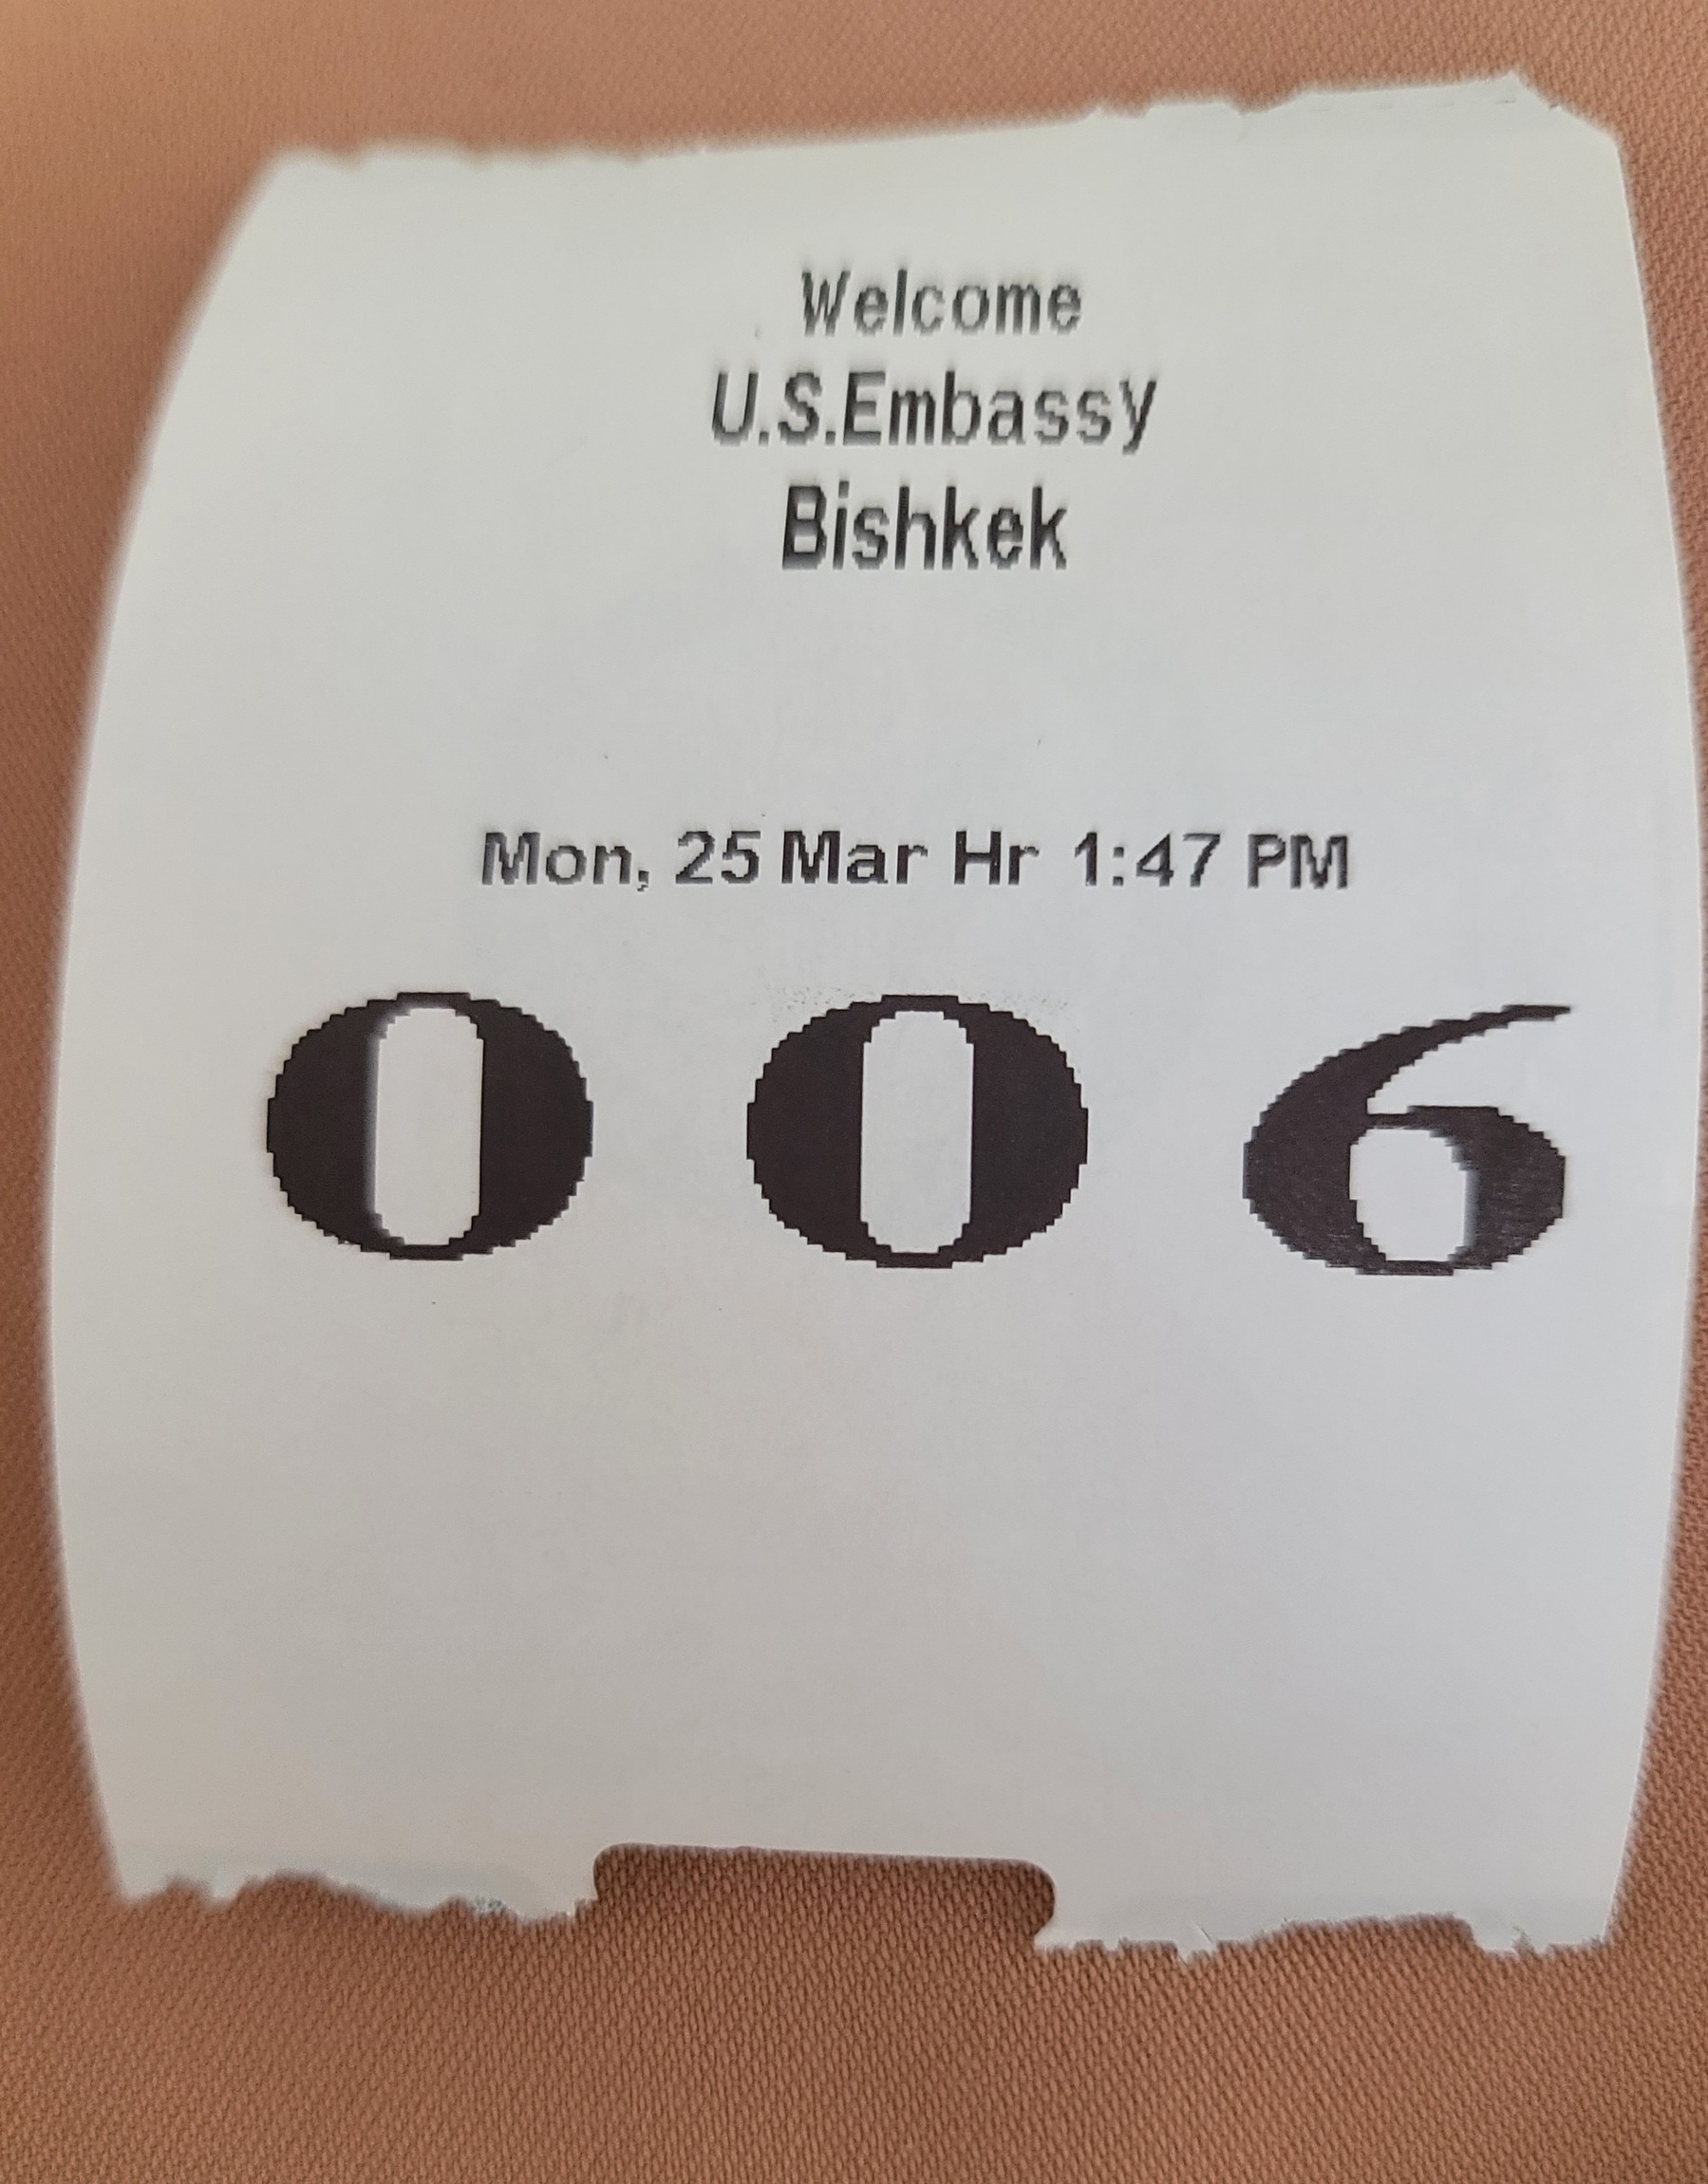 white receipt-looking paper with black text: "Welcome. US Embassy. Bishkek. Mon, 25 Mar Hr 1:47 PM. 006"